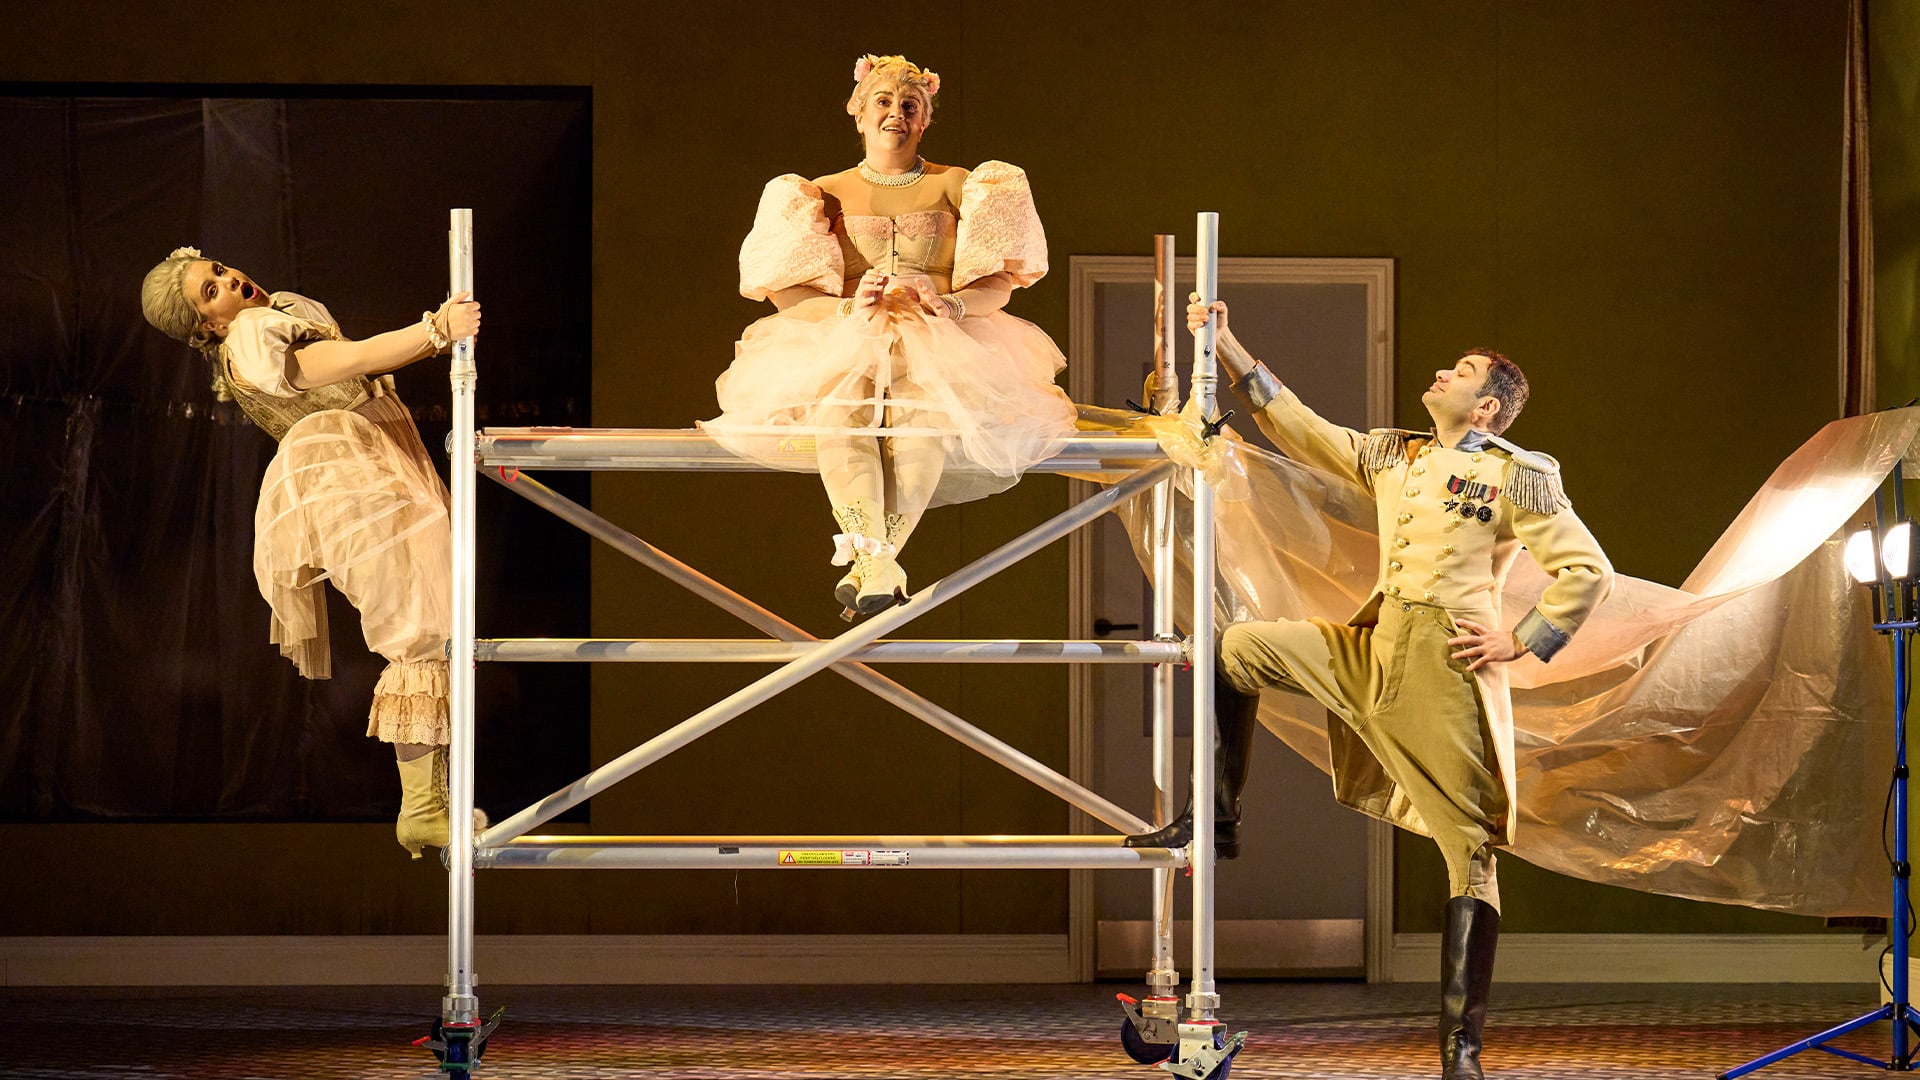 English Touring Opera's Cinderella production photo. A steel scaffolding frame. Left to right: A woman wearing a white frilly dress leans back whilst holding onto the frame; a woman wearing a frilly dress sits on top of the steel frame with their legs cross; a man wearing Napoleonic army officer clothing rests one leg on the steel frame and looks up in accomplishment. Behind the man, a piece of beige tarpaulin hung to look like a flying cape on the man. They are all in a beige-walled room, and there is a lilac door behind them.